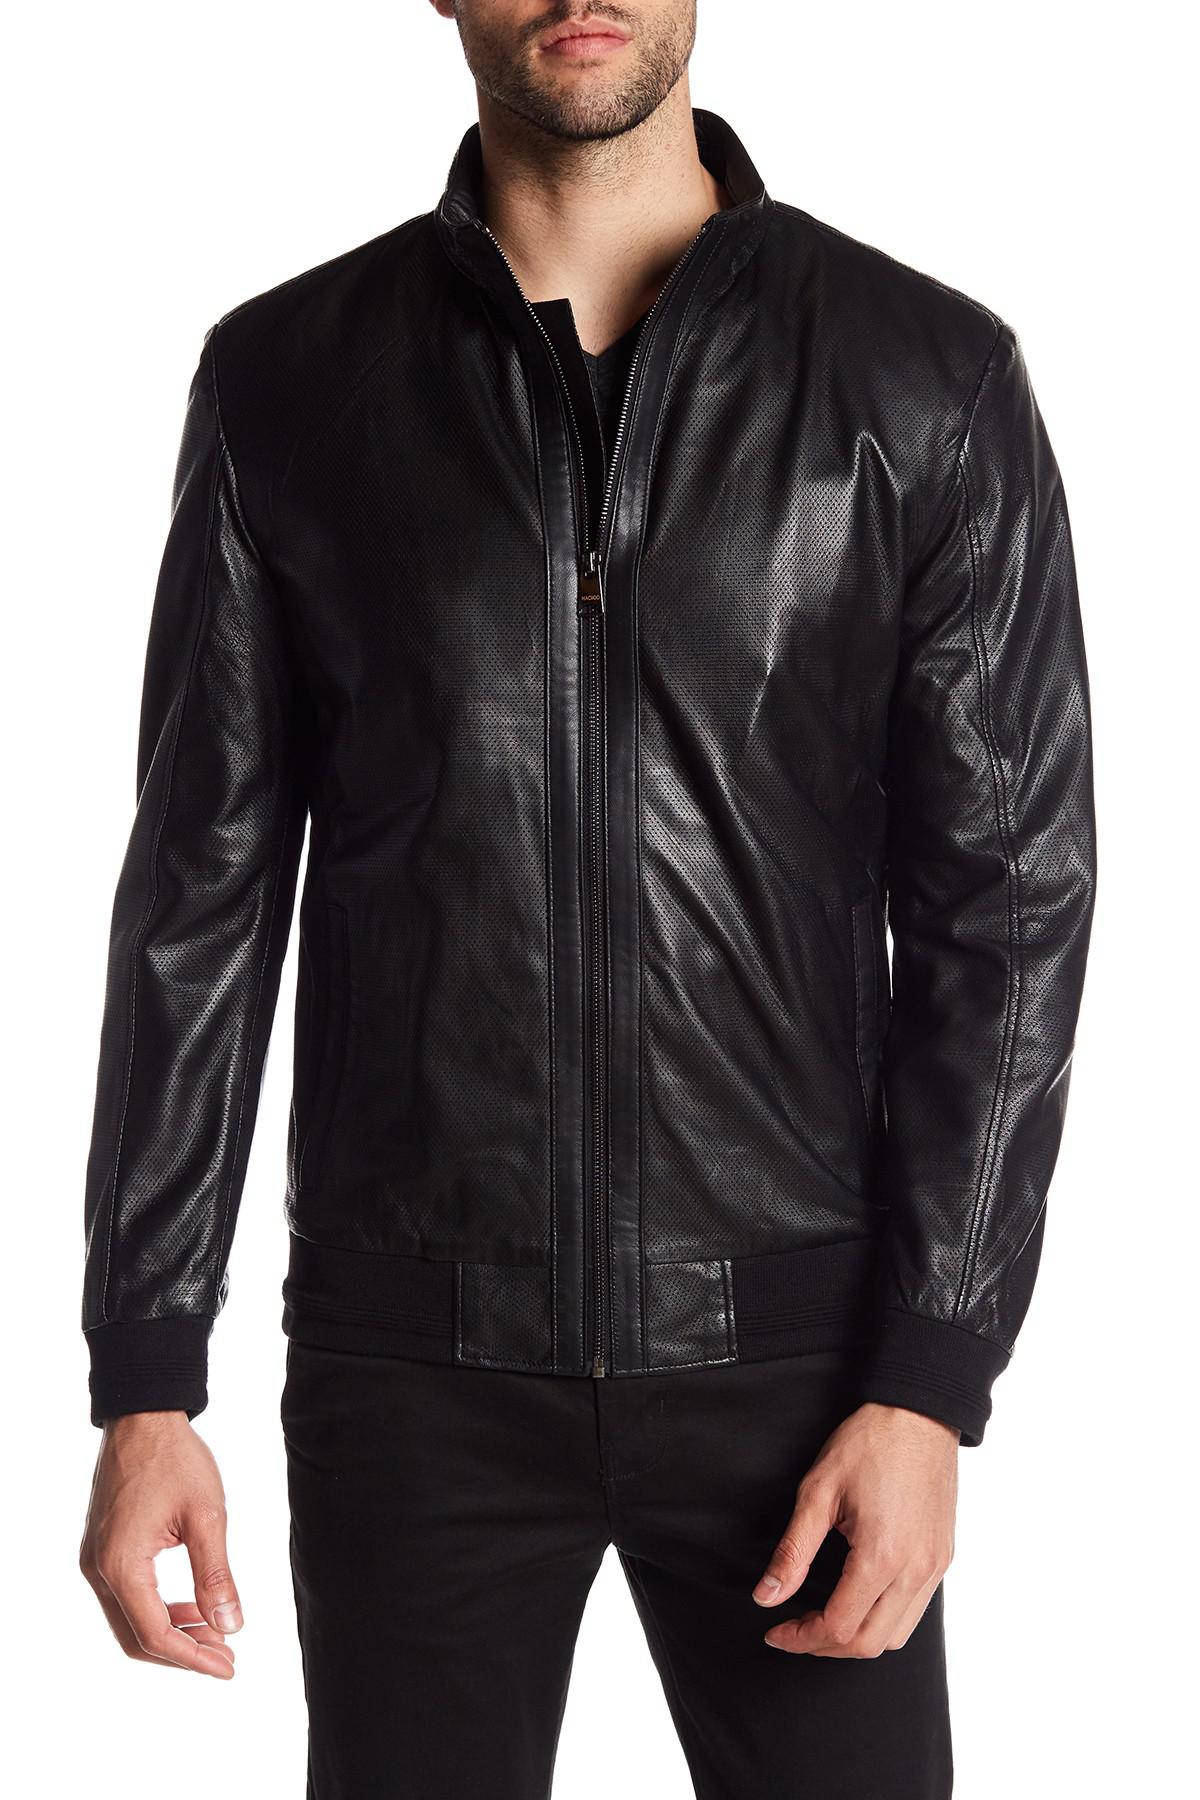 41+ Perforated Leather Jacket Images